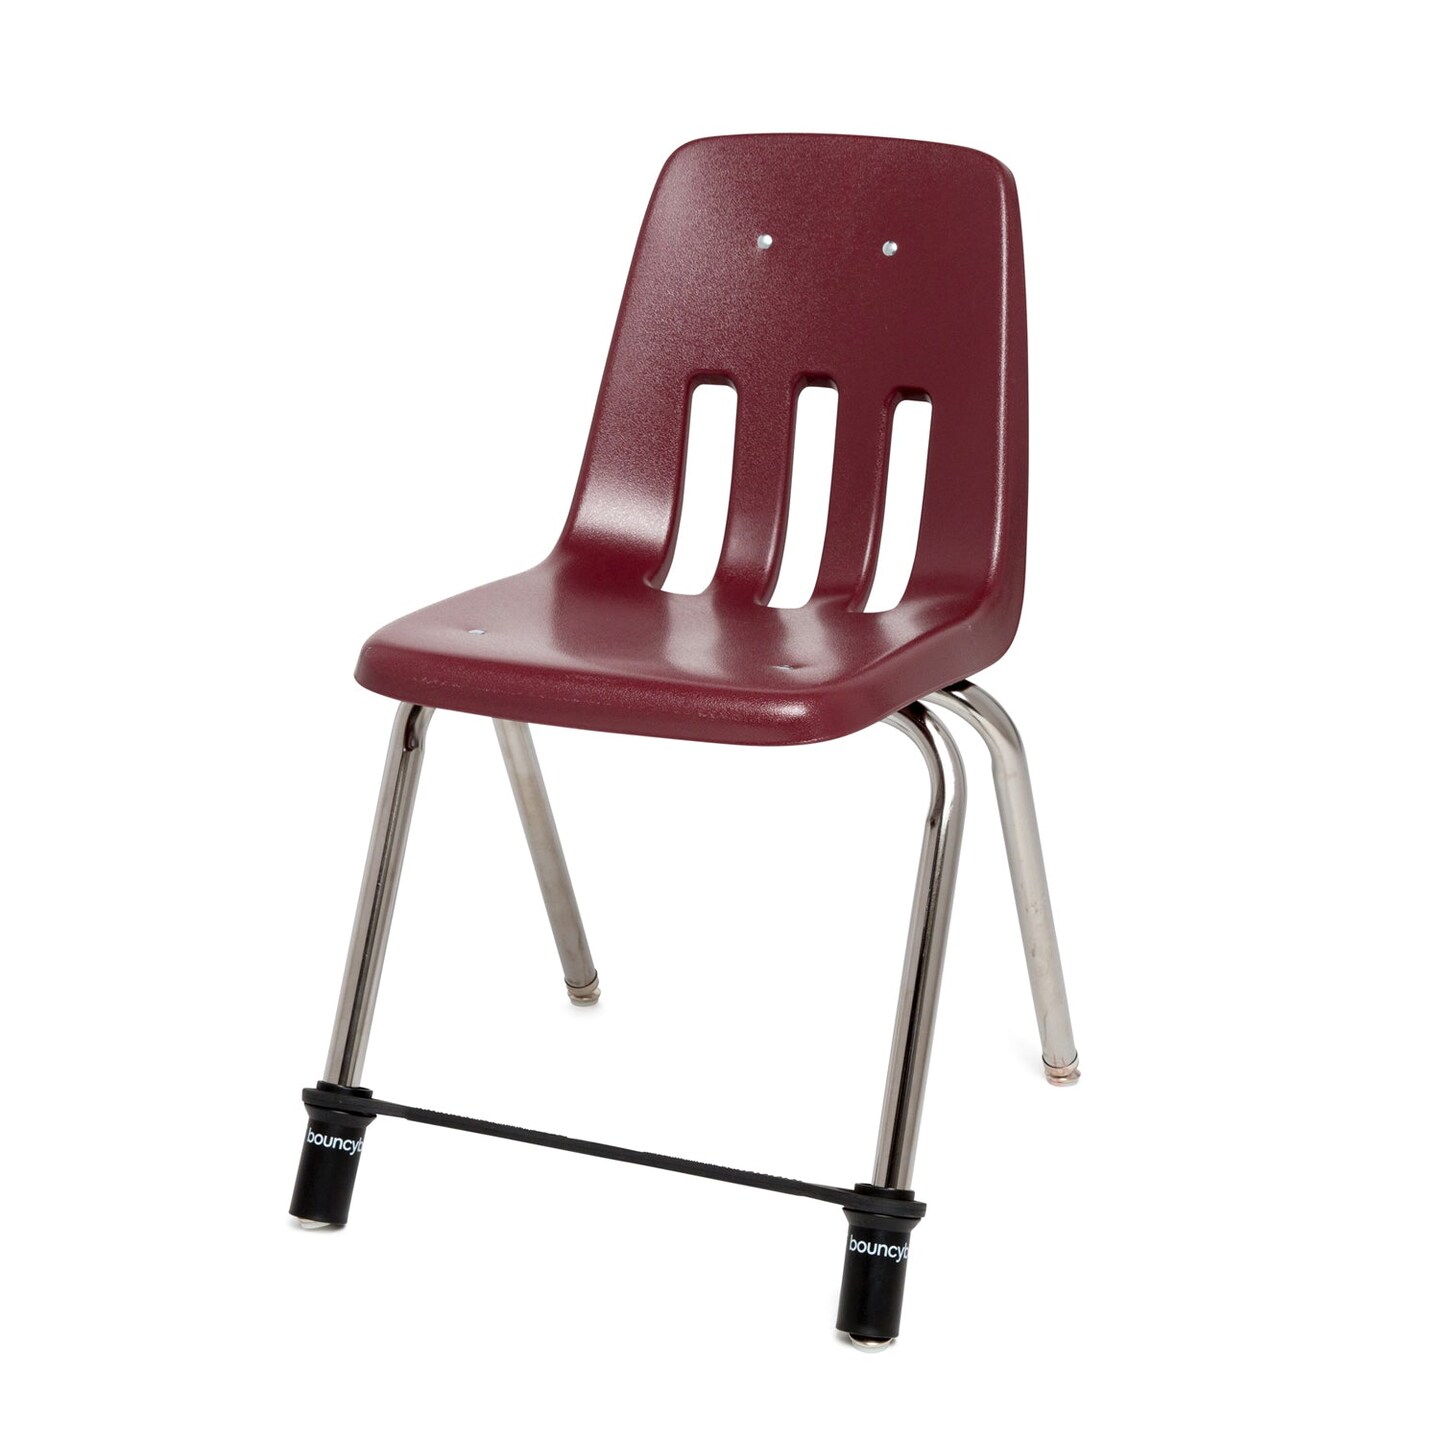 Chair Band for Middle/High School Chairs, Black